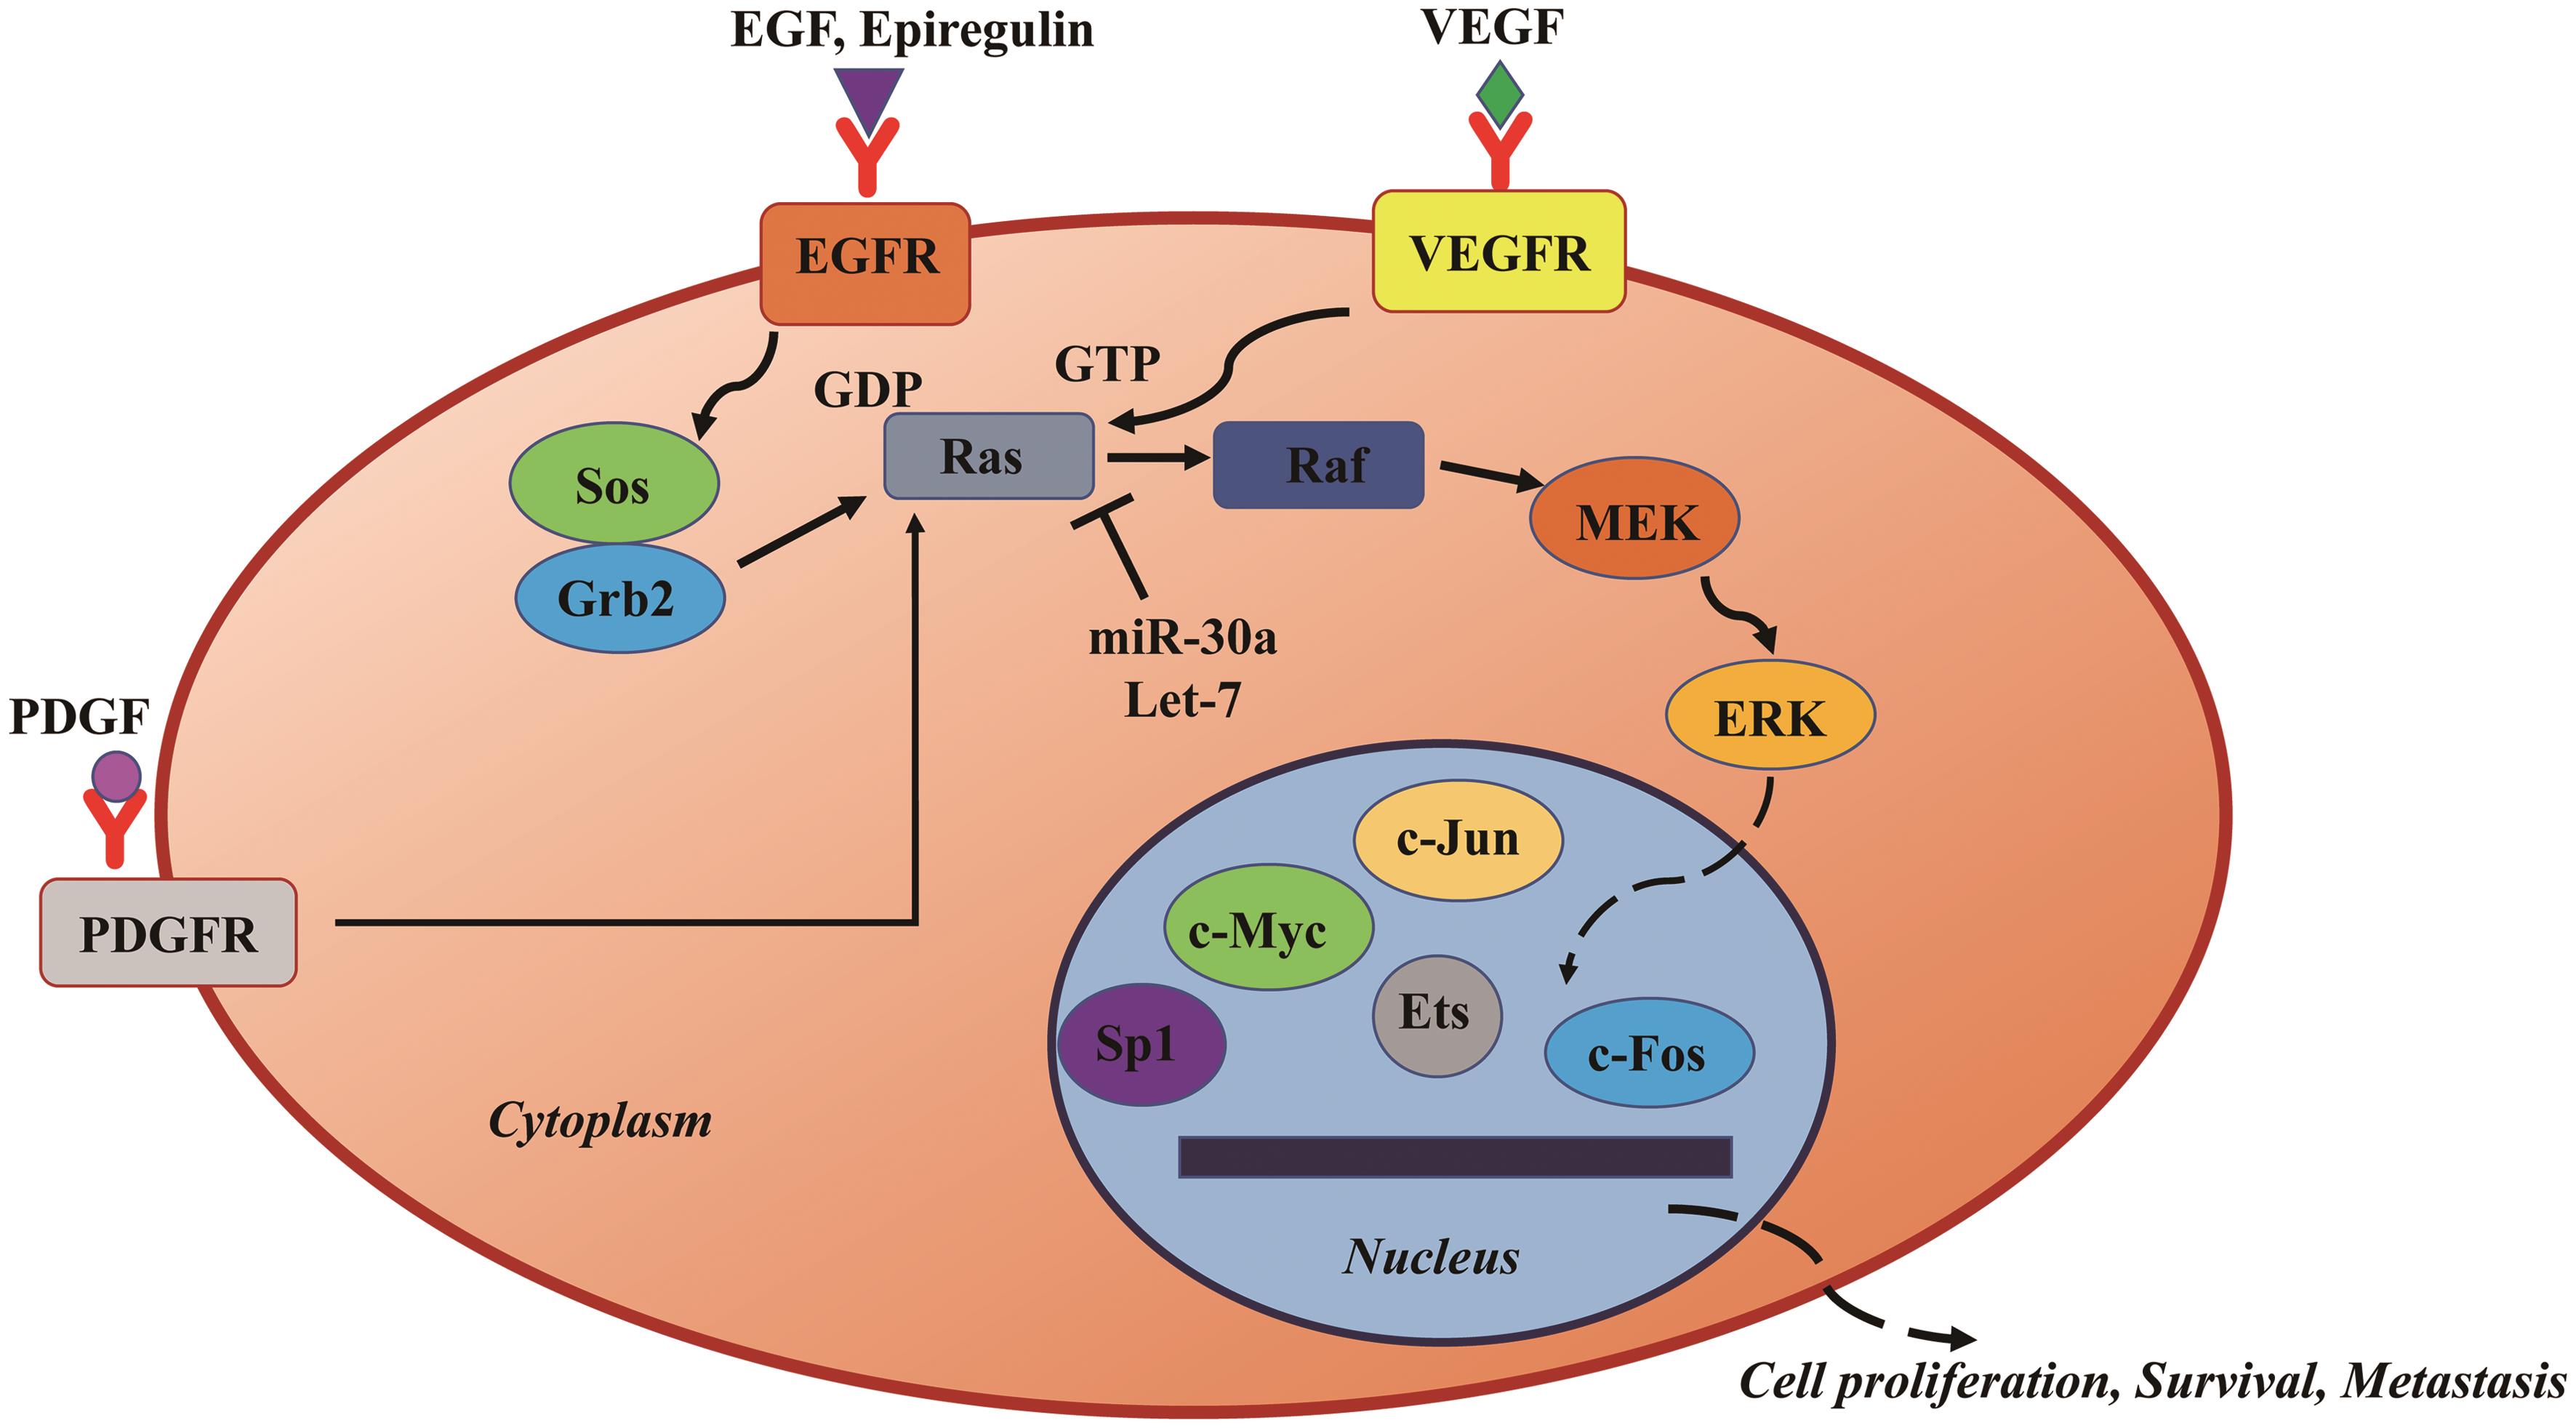 Activation of the most important Ras/Raf/MEK/ERK signaling cascade in HCC through growth factors and hormones.